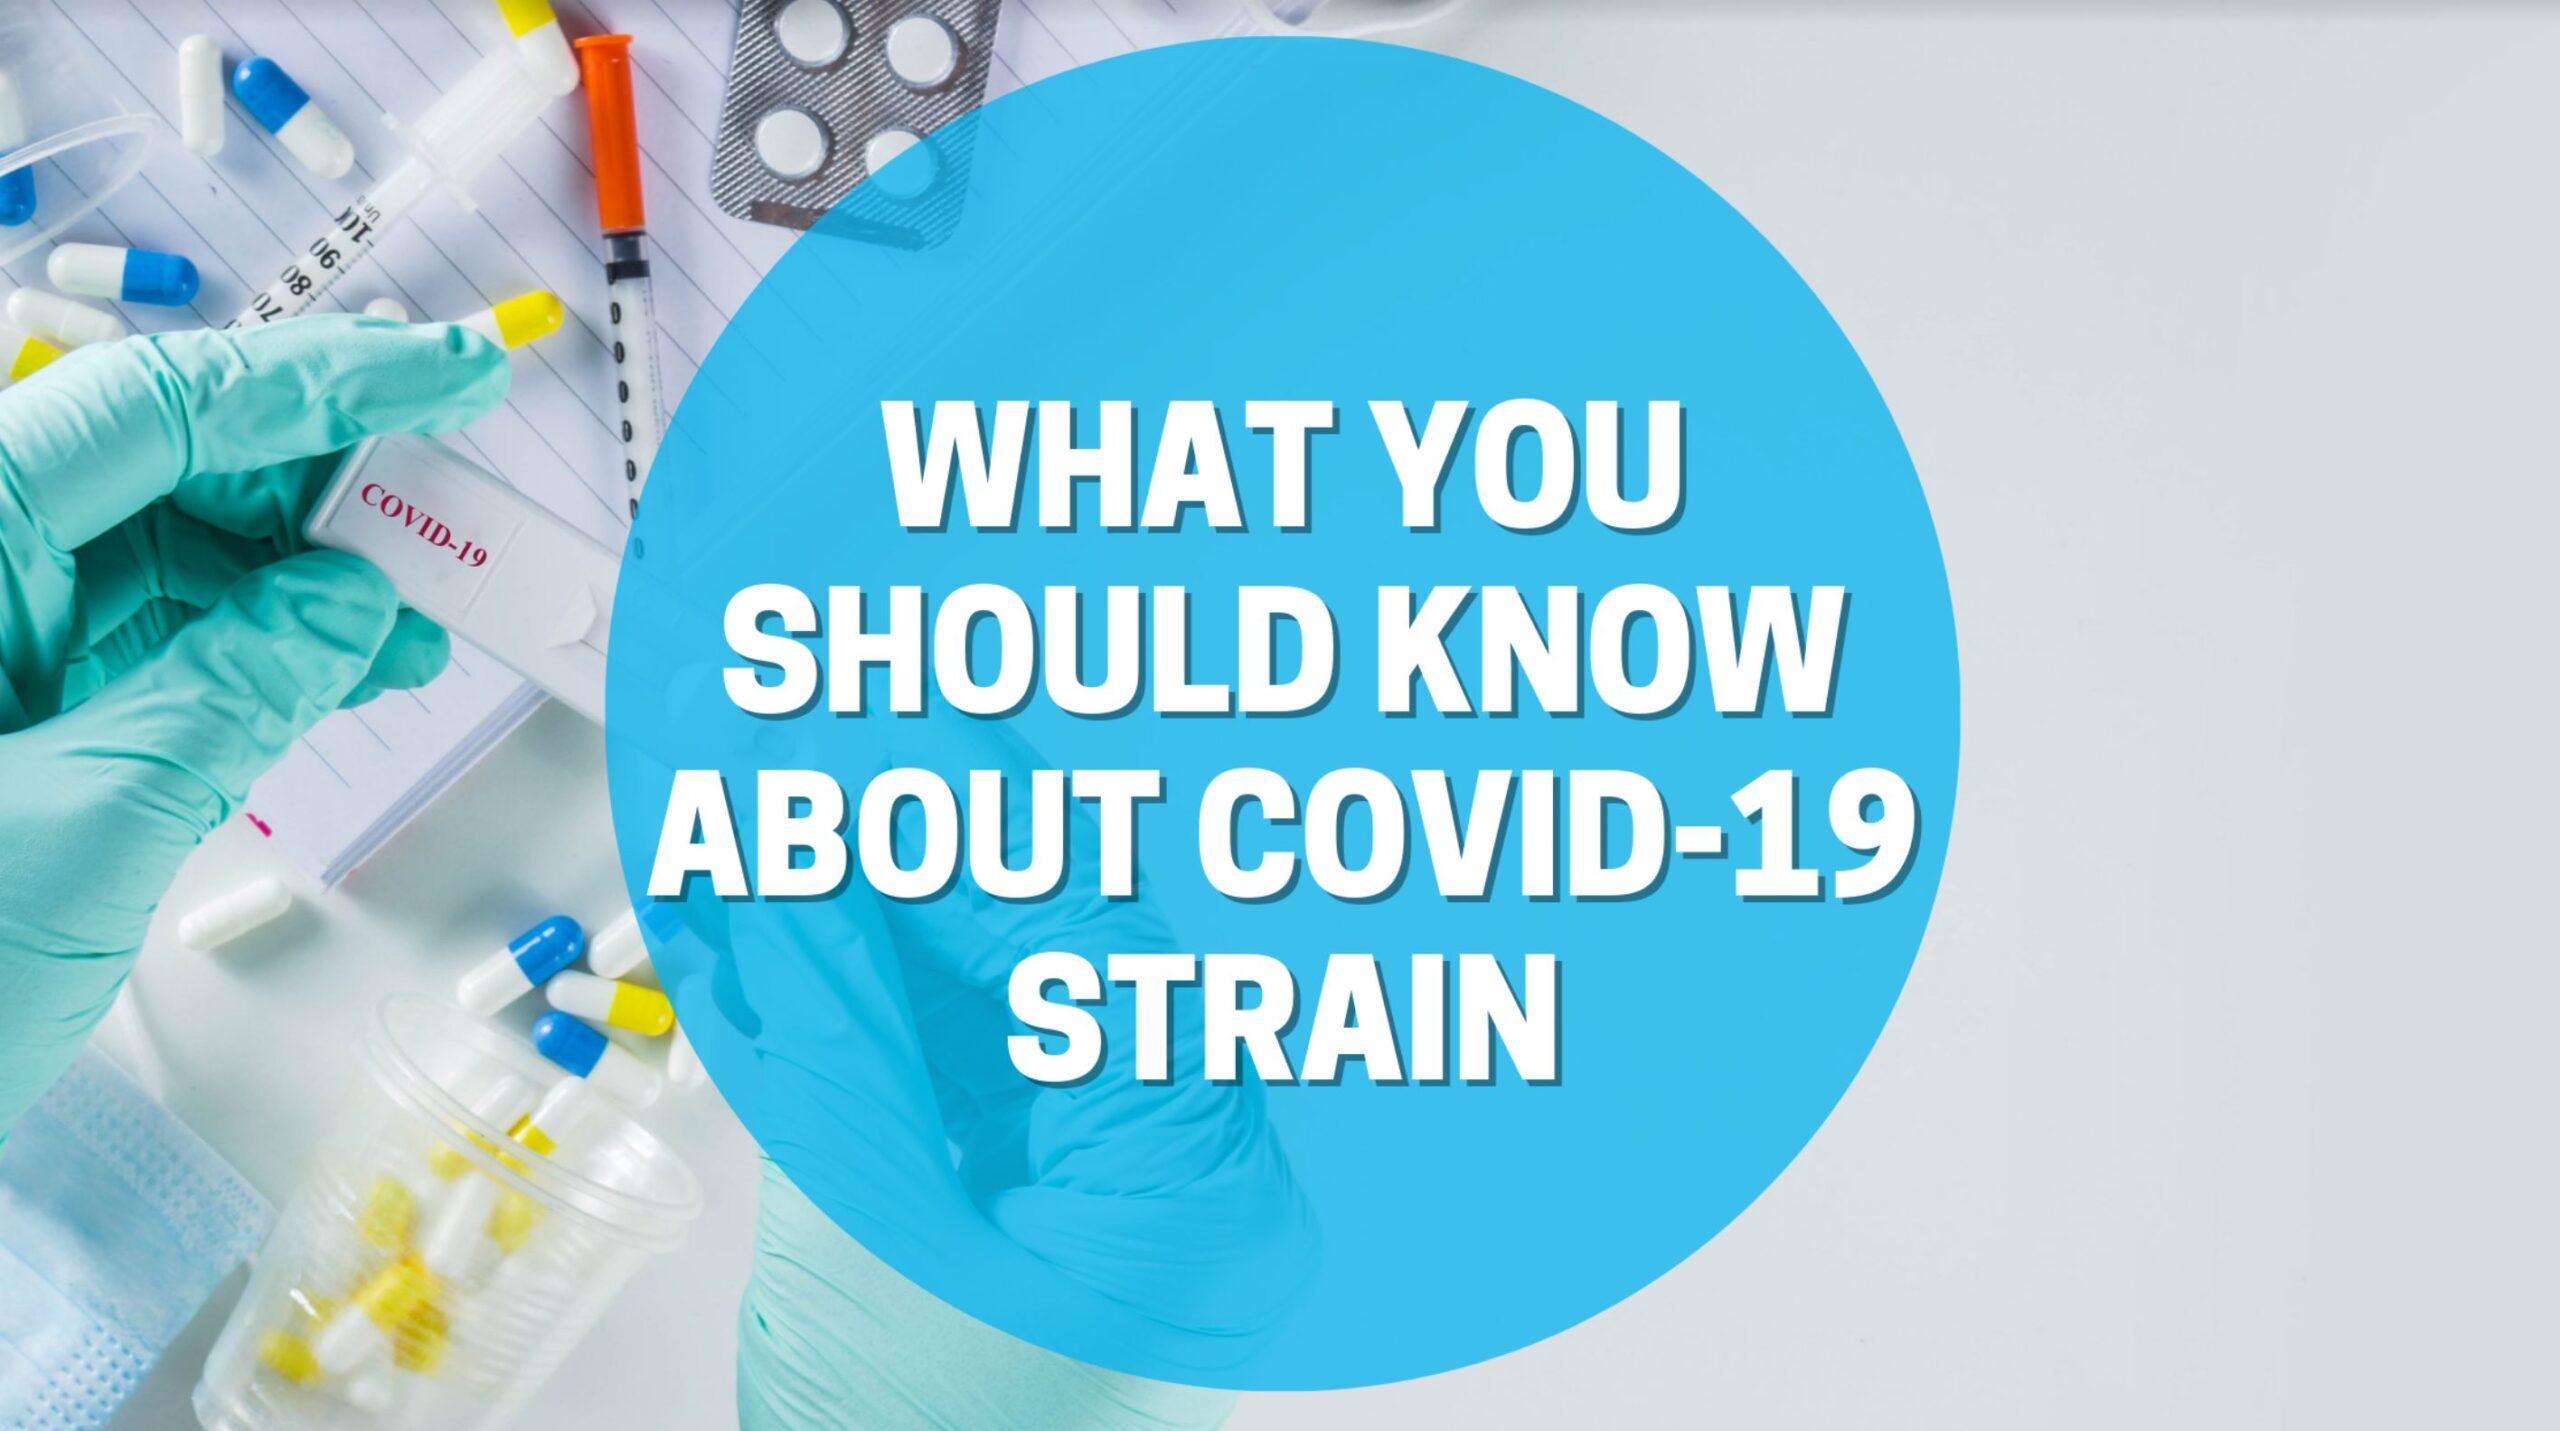 What Should You Know About COVID-19 Strain